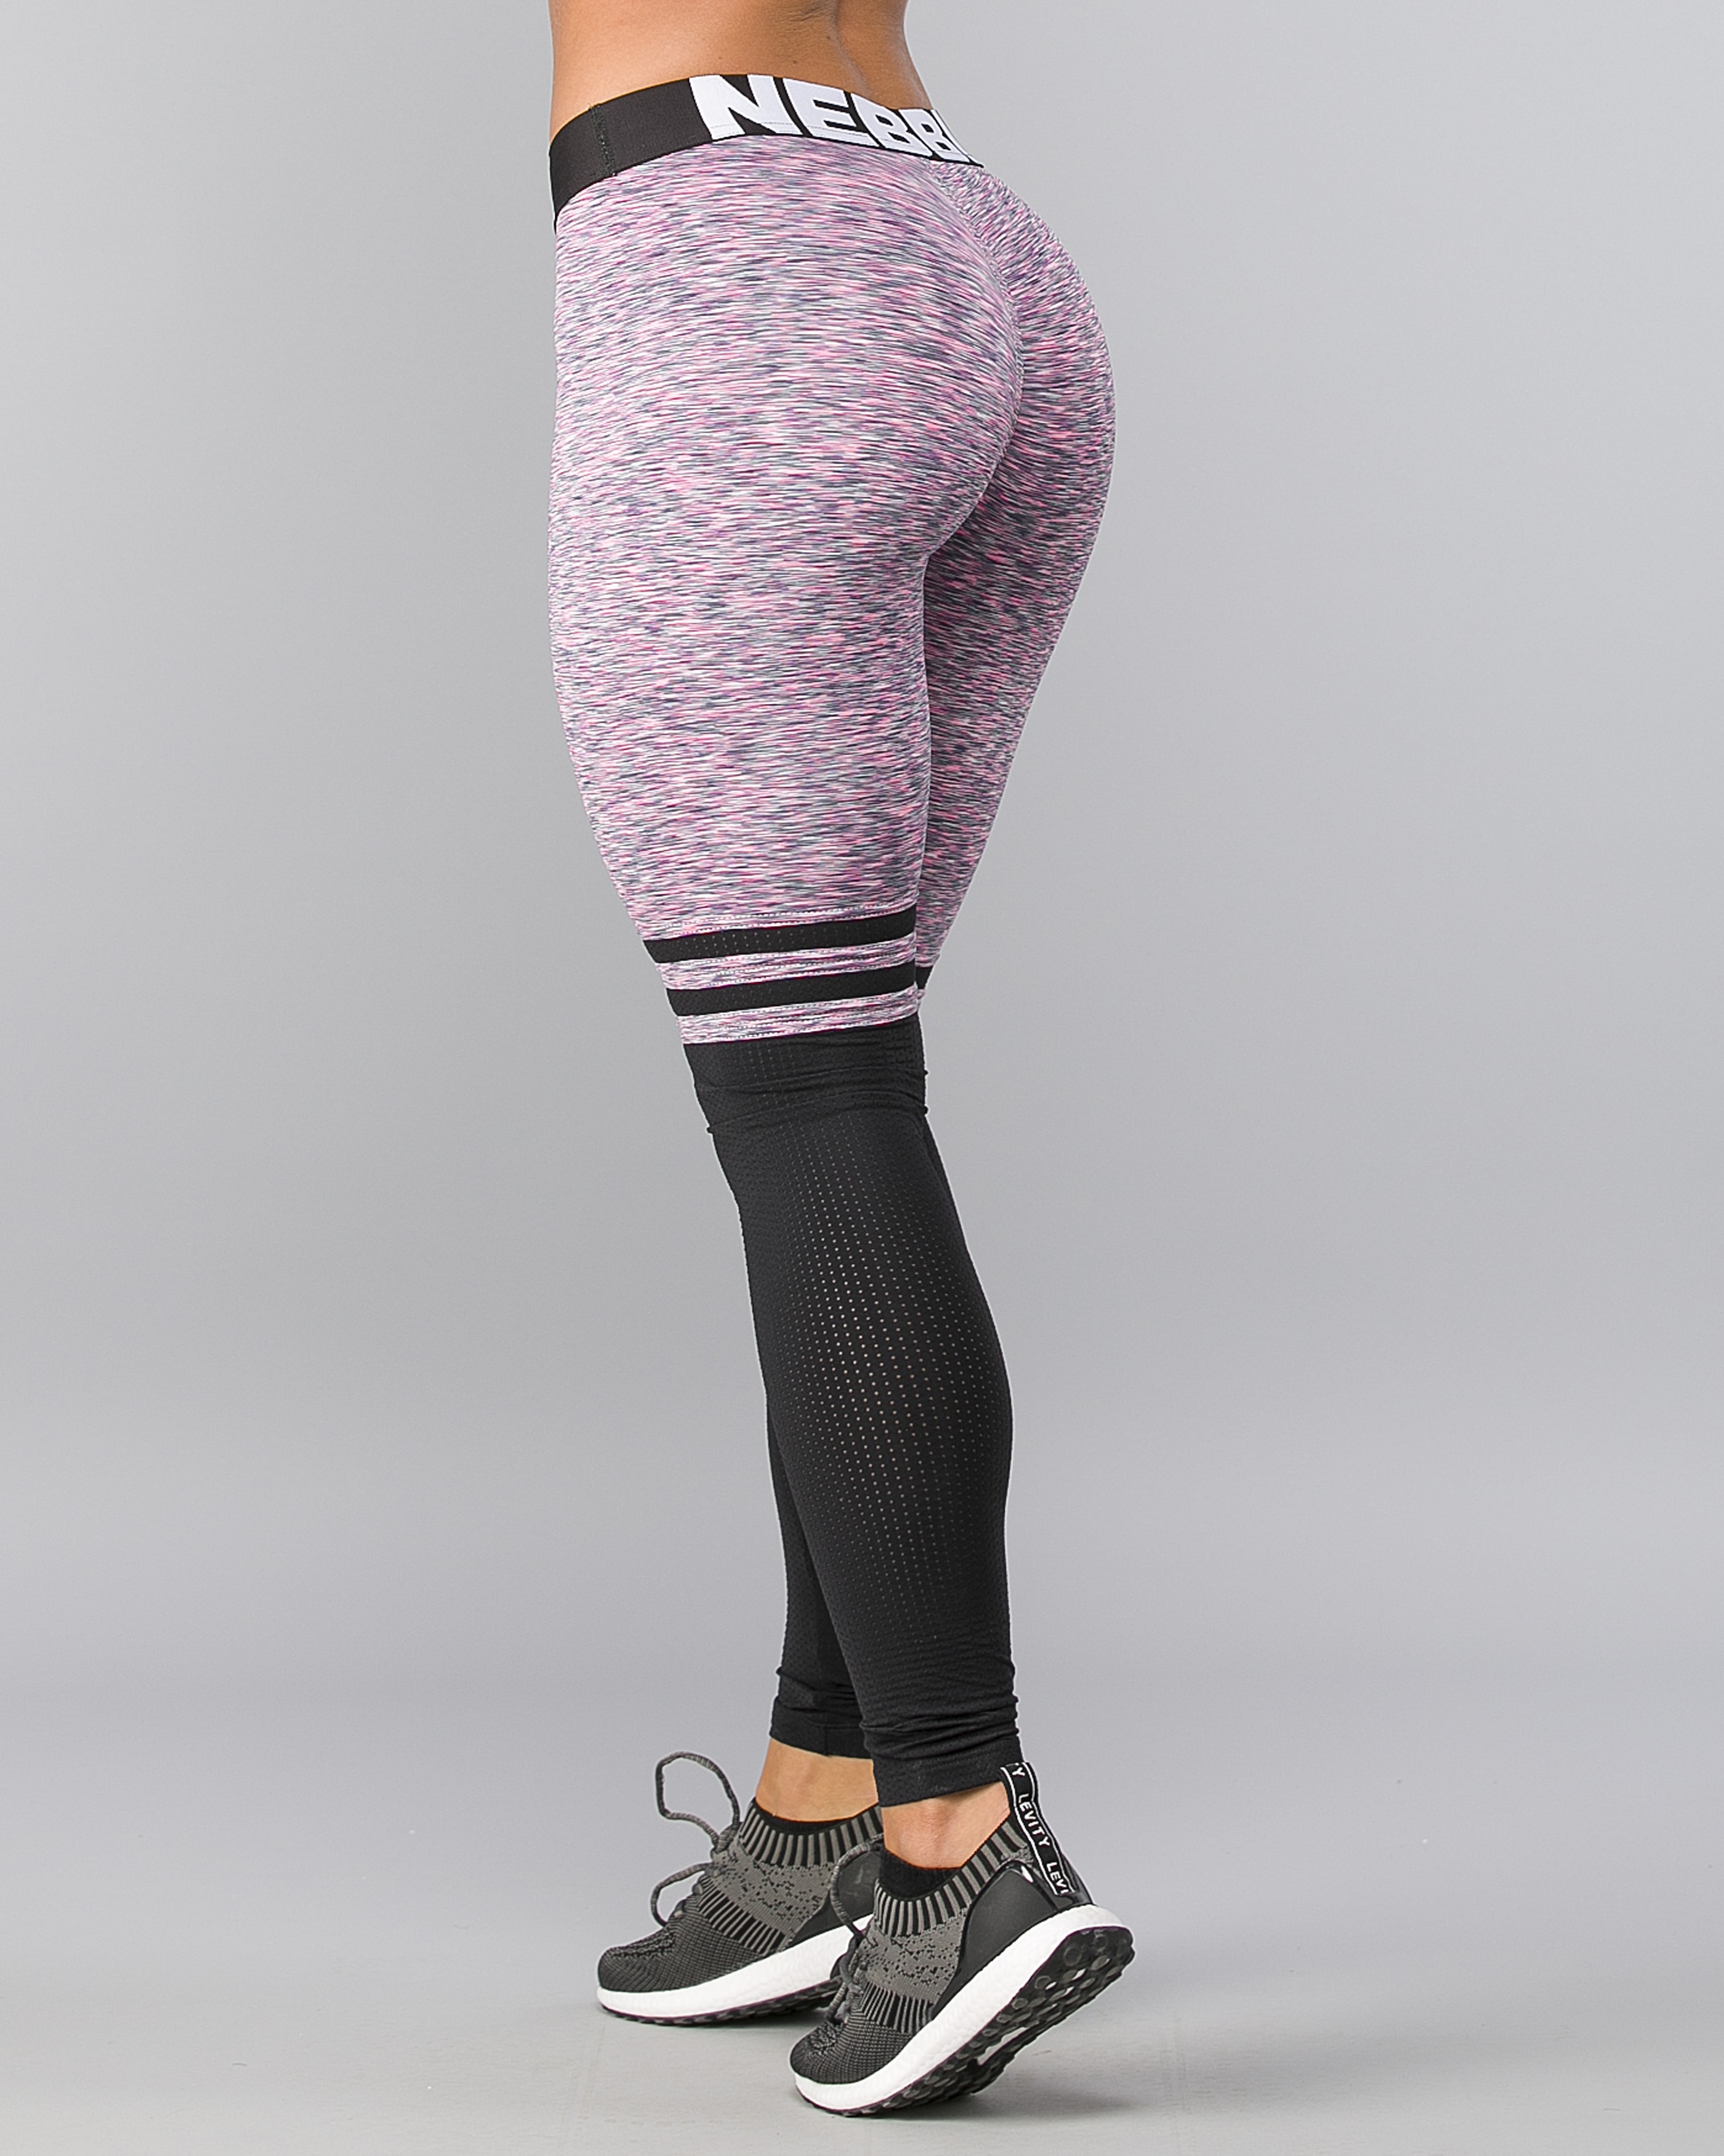 Simple Above The Knee Workout Tights for Gym